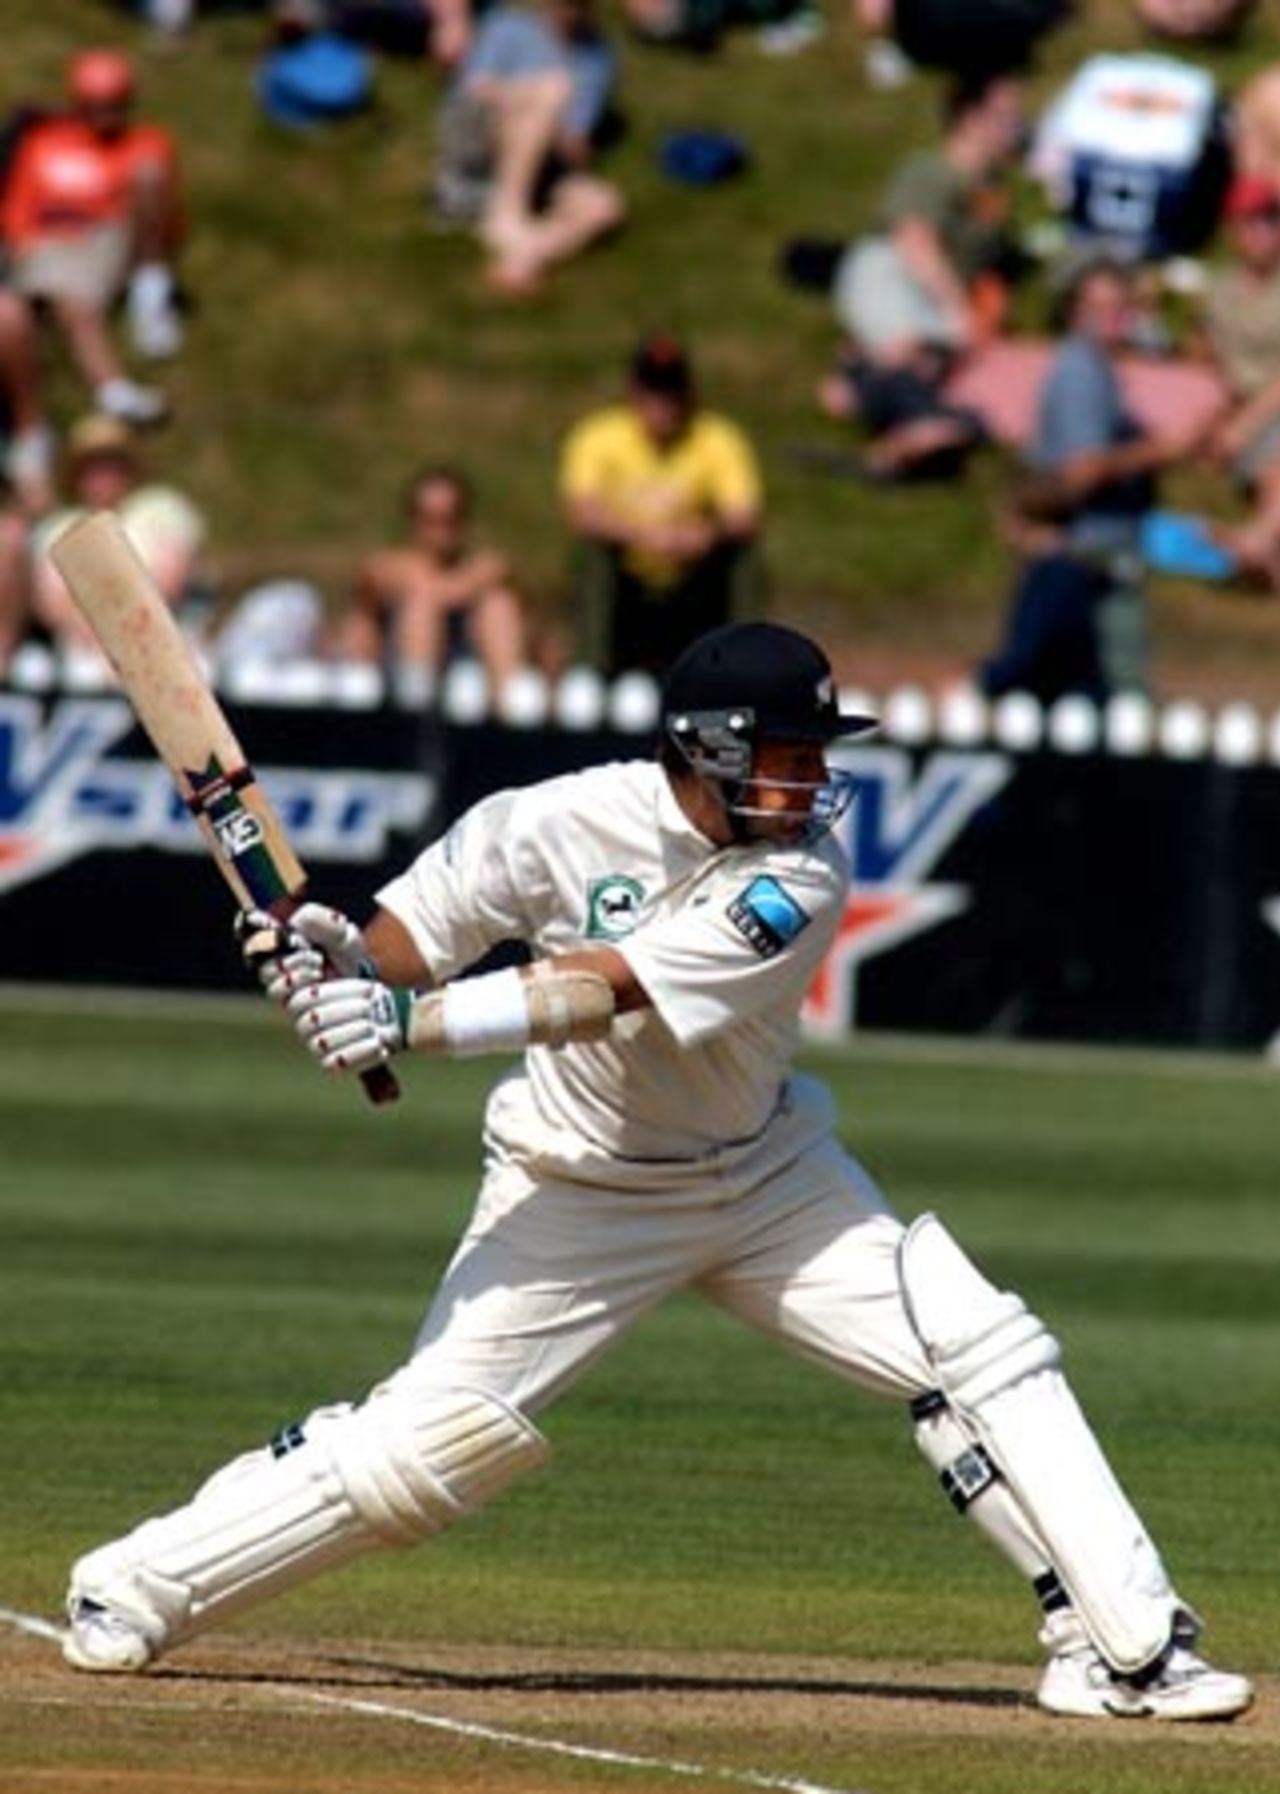 New Zealand batsman Craig McMillan at full stretch about to drive a delivery during his first innings of 70. 2nd Test: New Zealand v Bangladesh at Basin Reserve, Wellington, 26-30 Dec 2001 (29 December 2001).